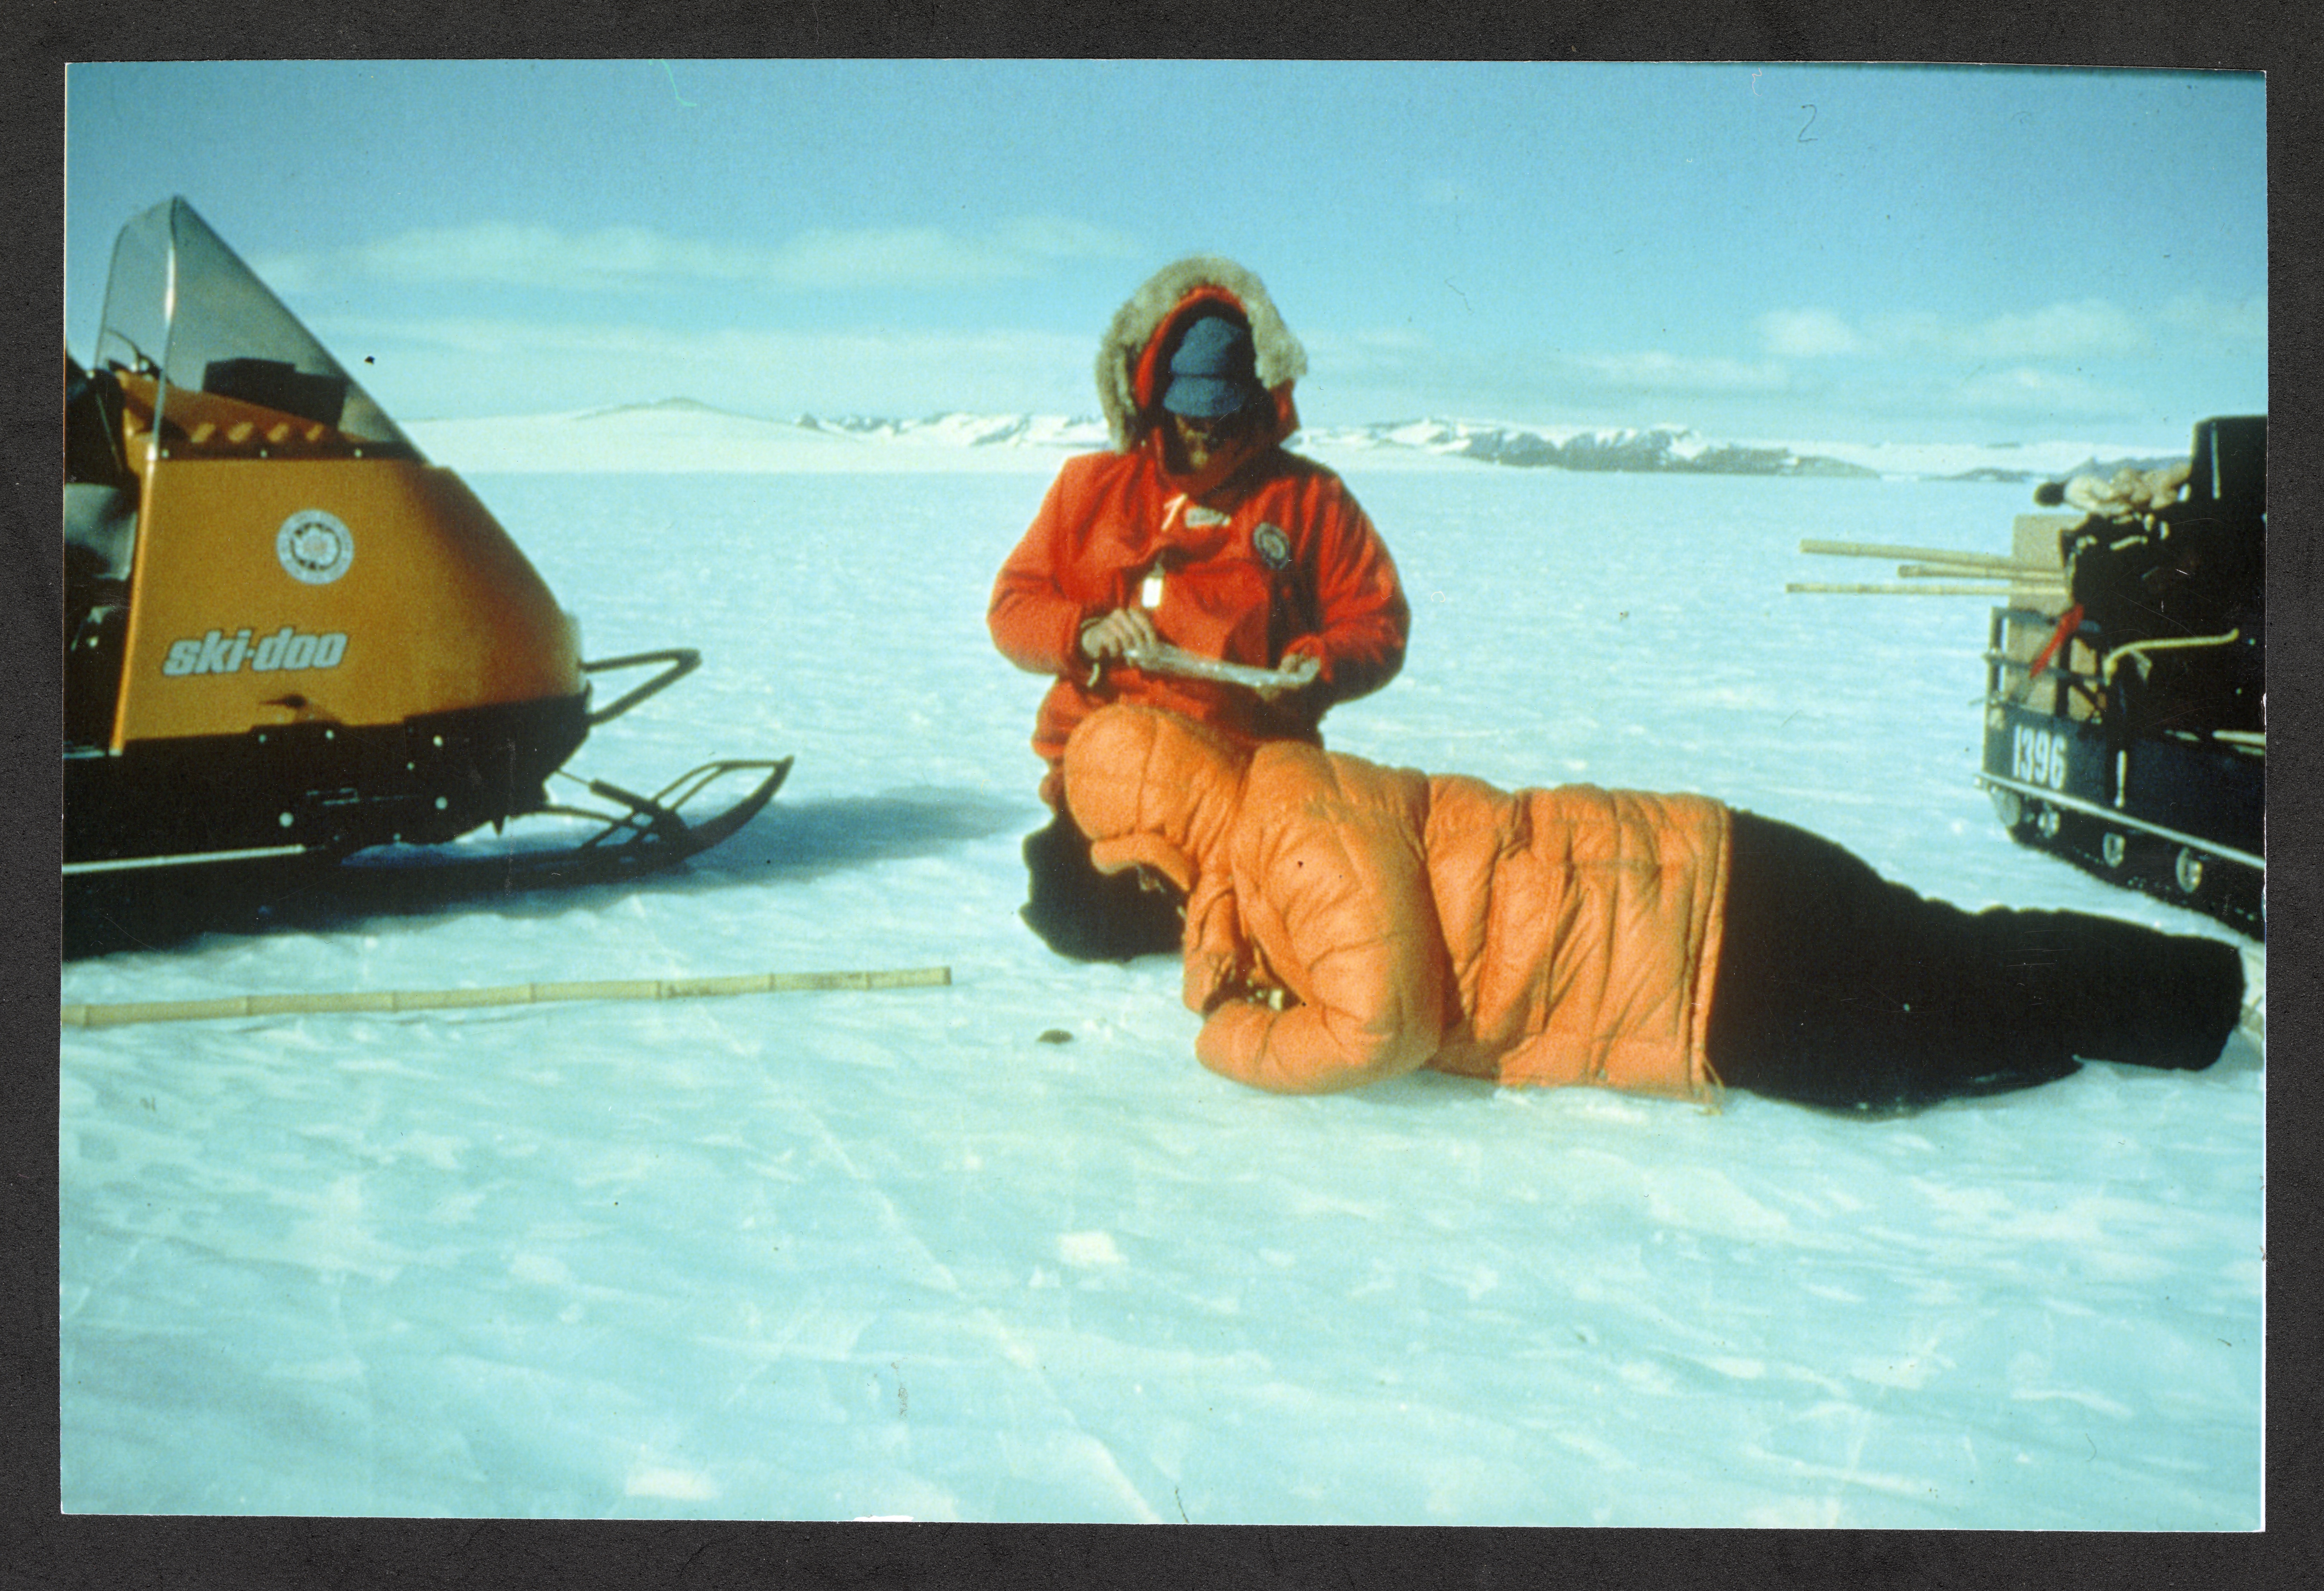 Ursula Marvin lies on her stomach to look into ice. A colleague kneels next to her, taking notes.